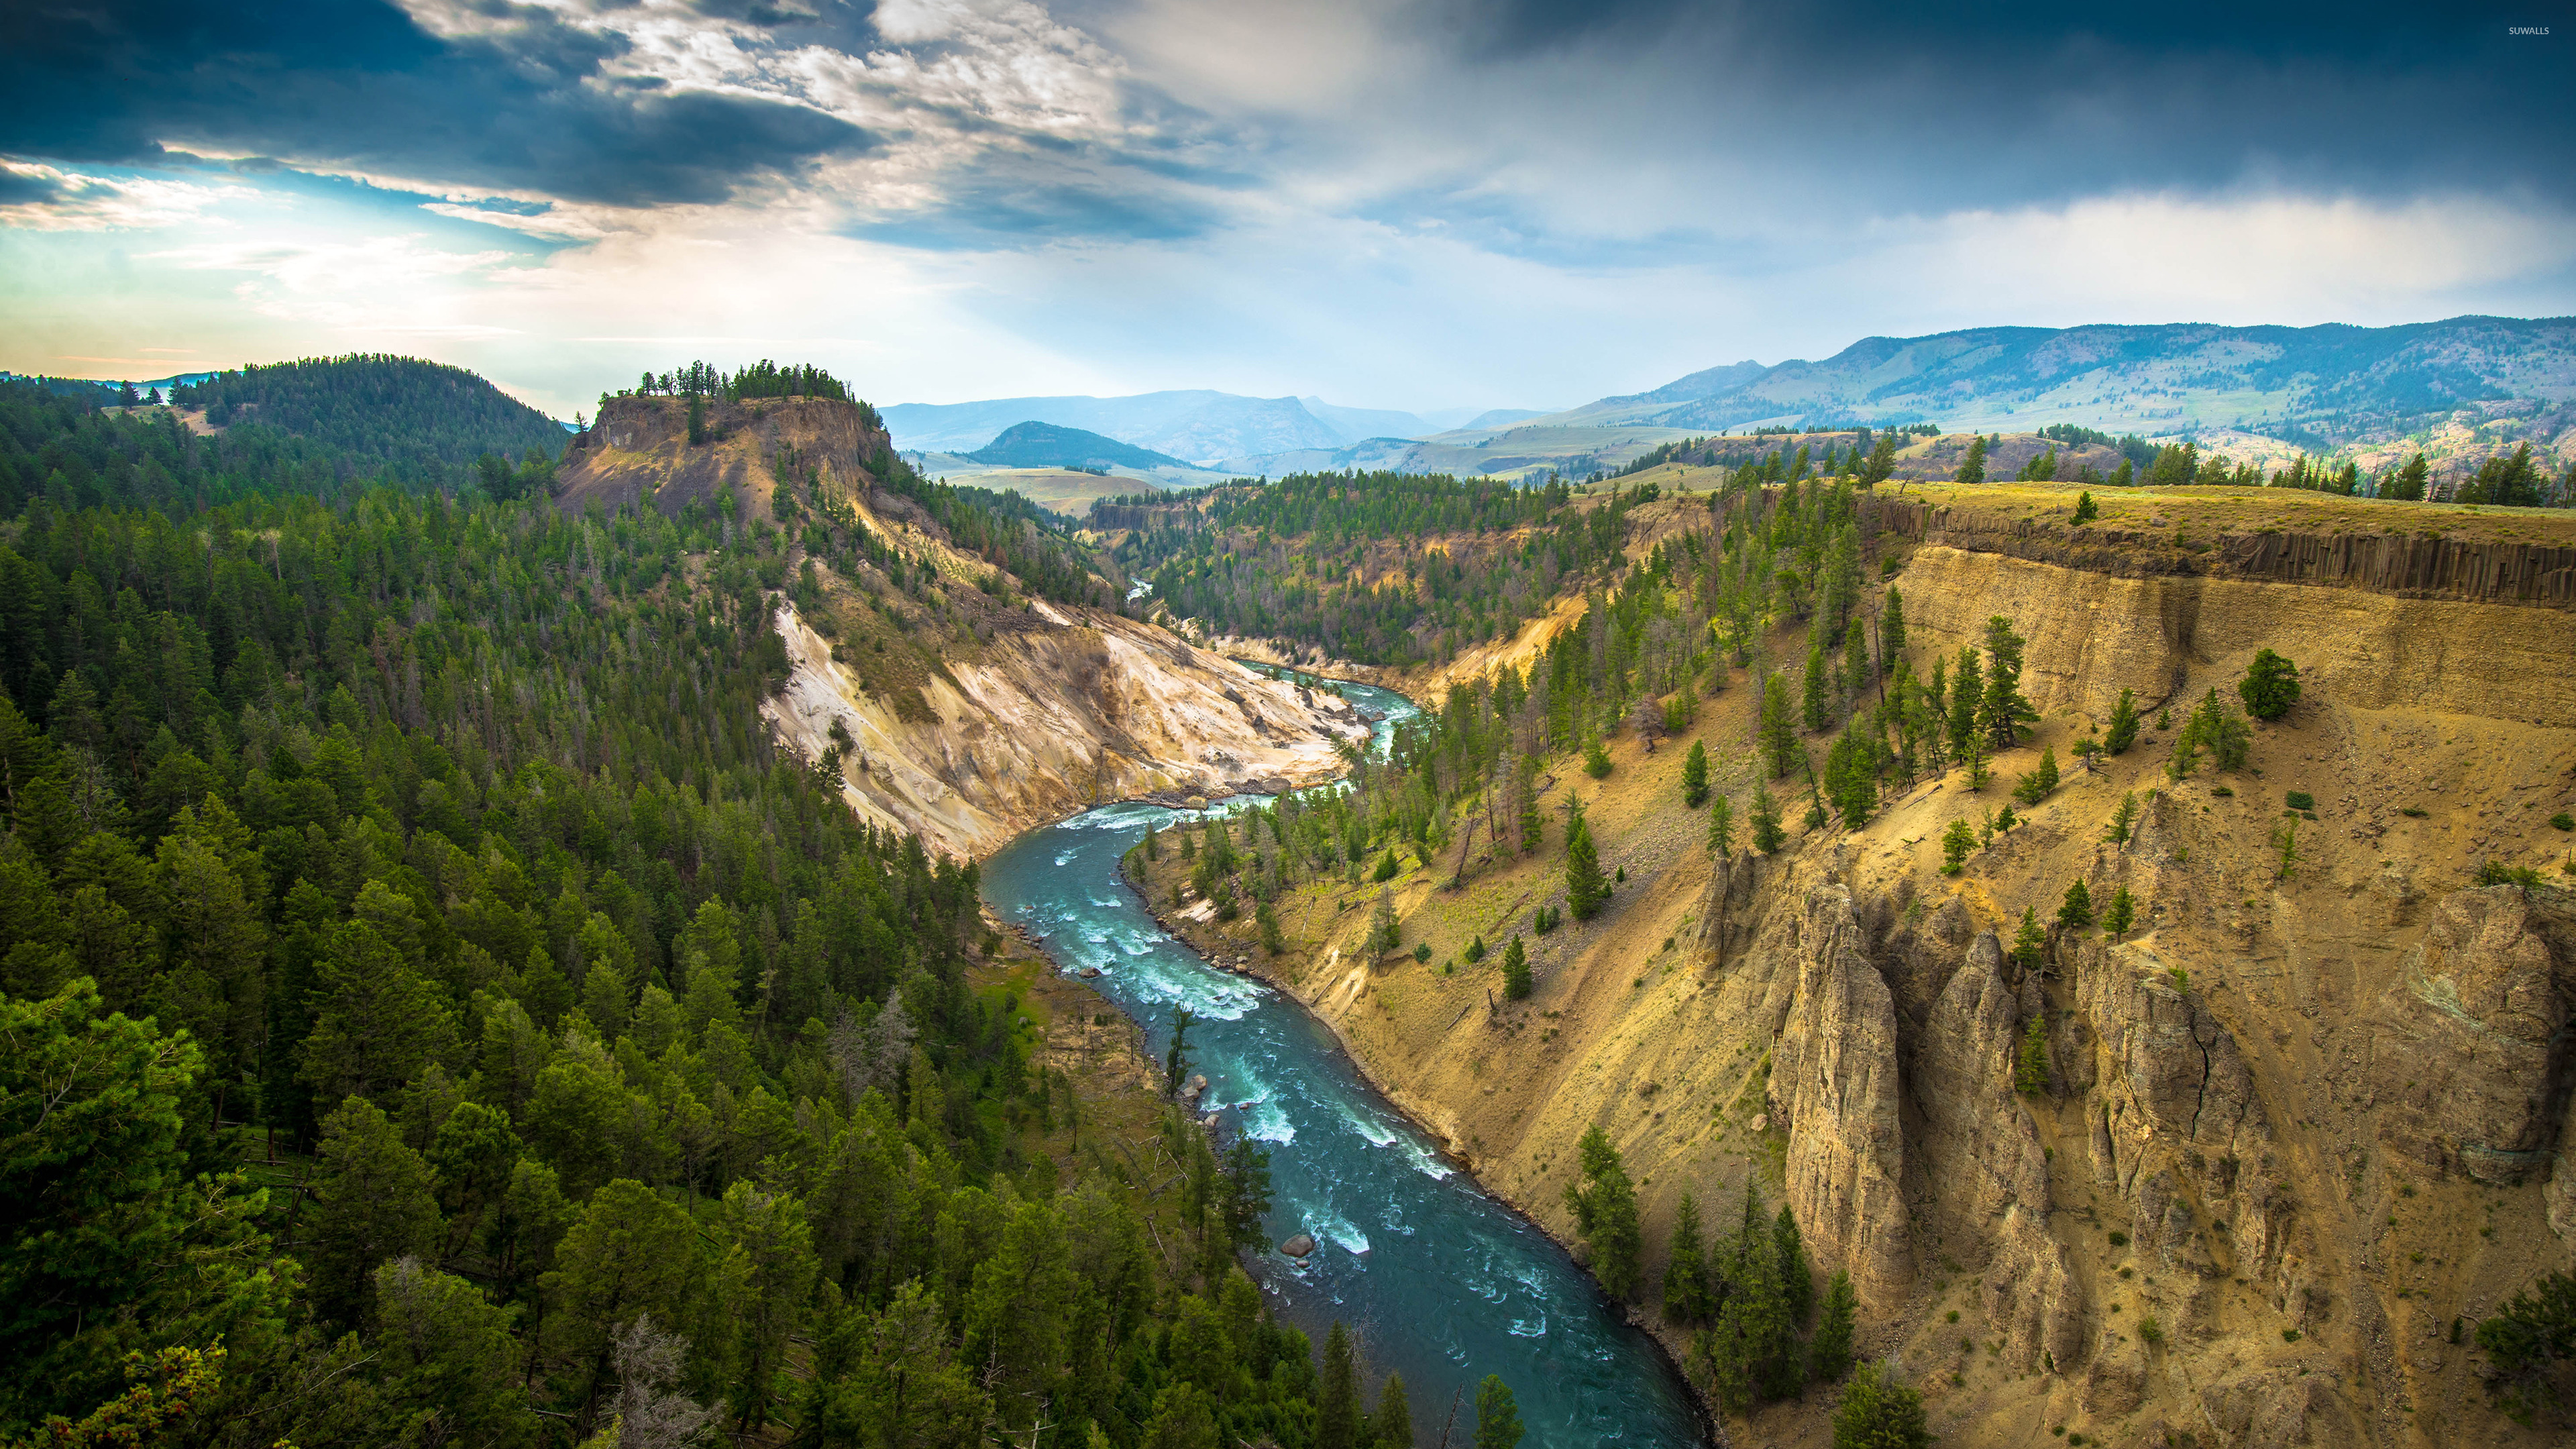 Yellowstone National Park Wallpapers and Background Images   stmednet